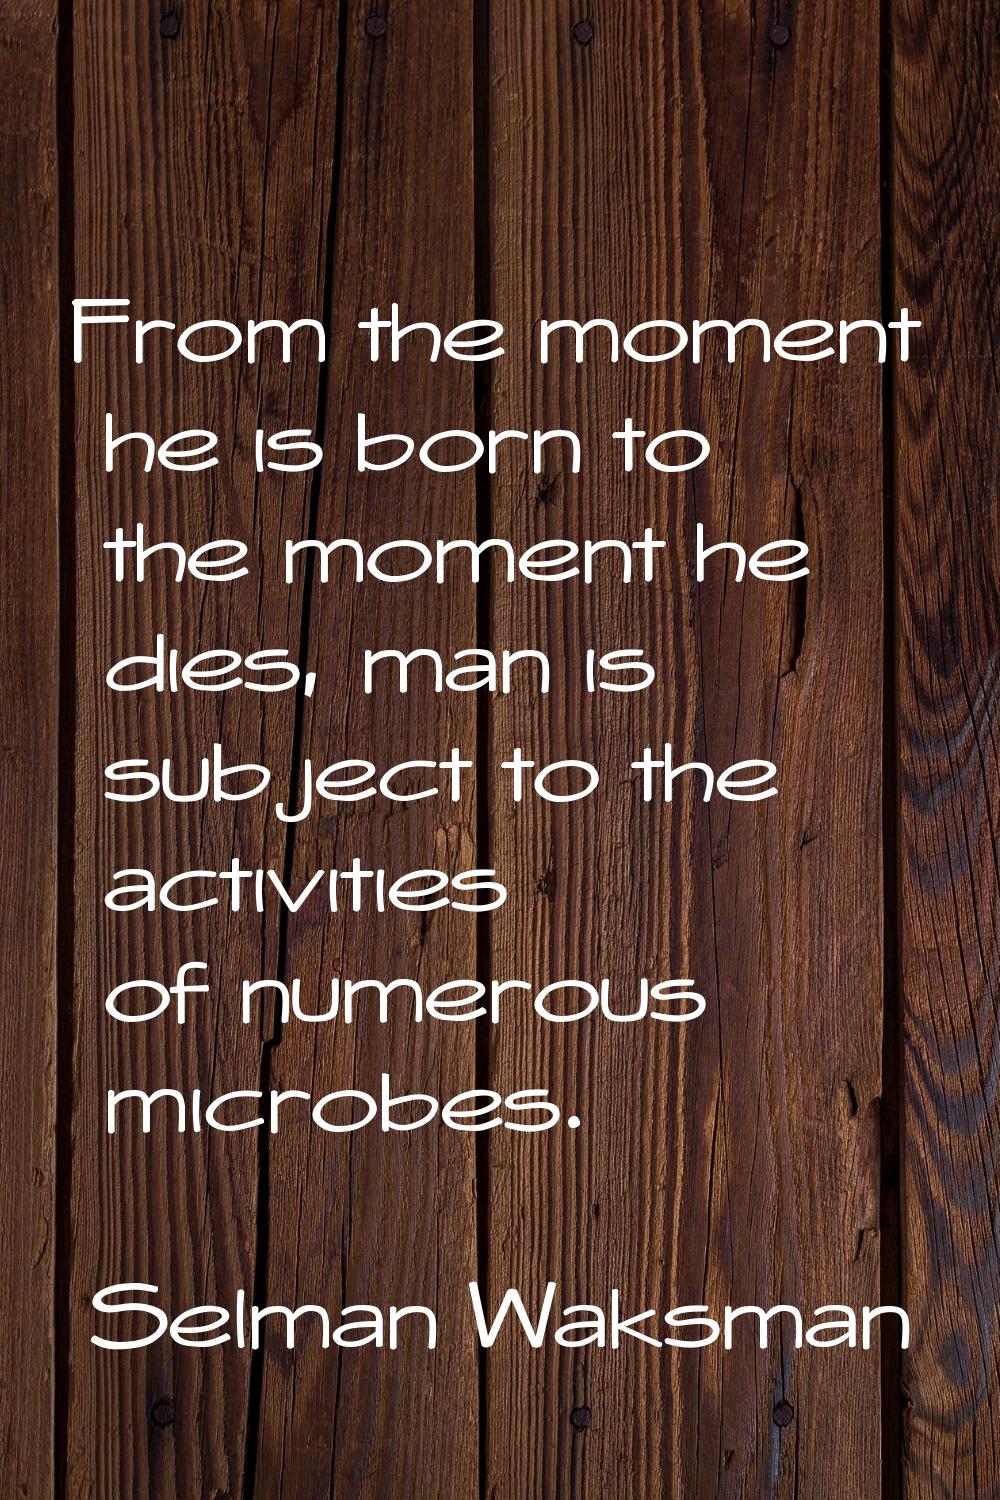 From the moment he is born to the moment he dies, man is subject to the activities of numerous micr